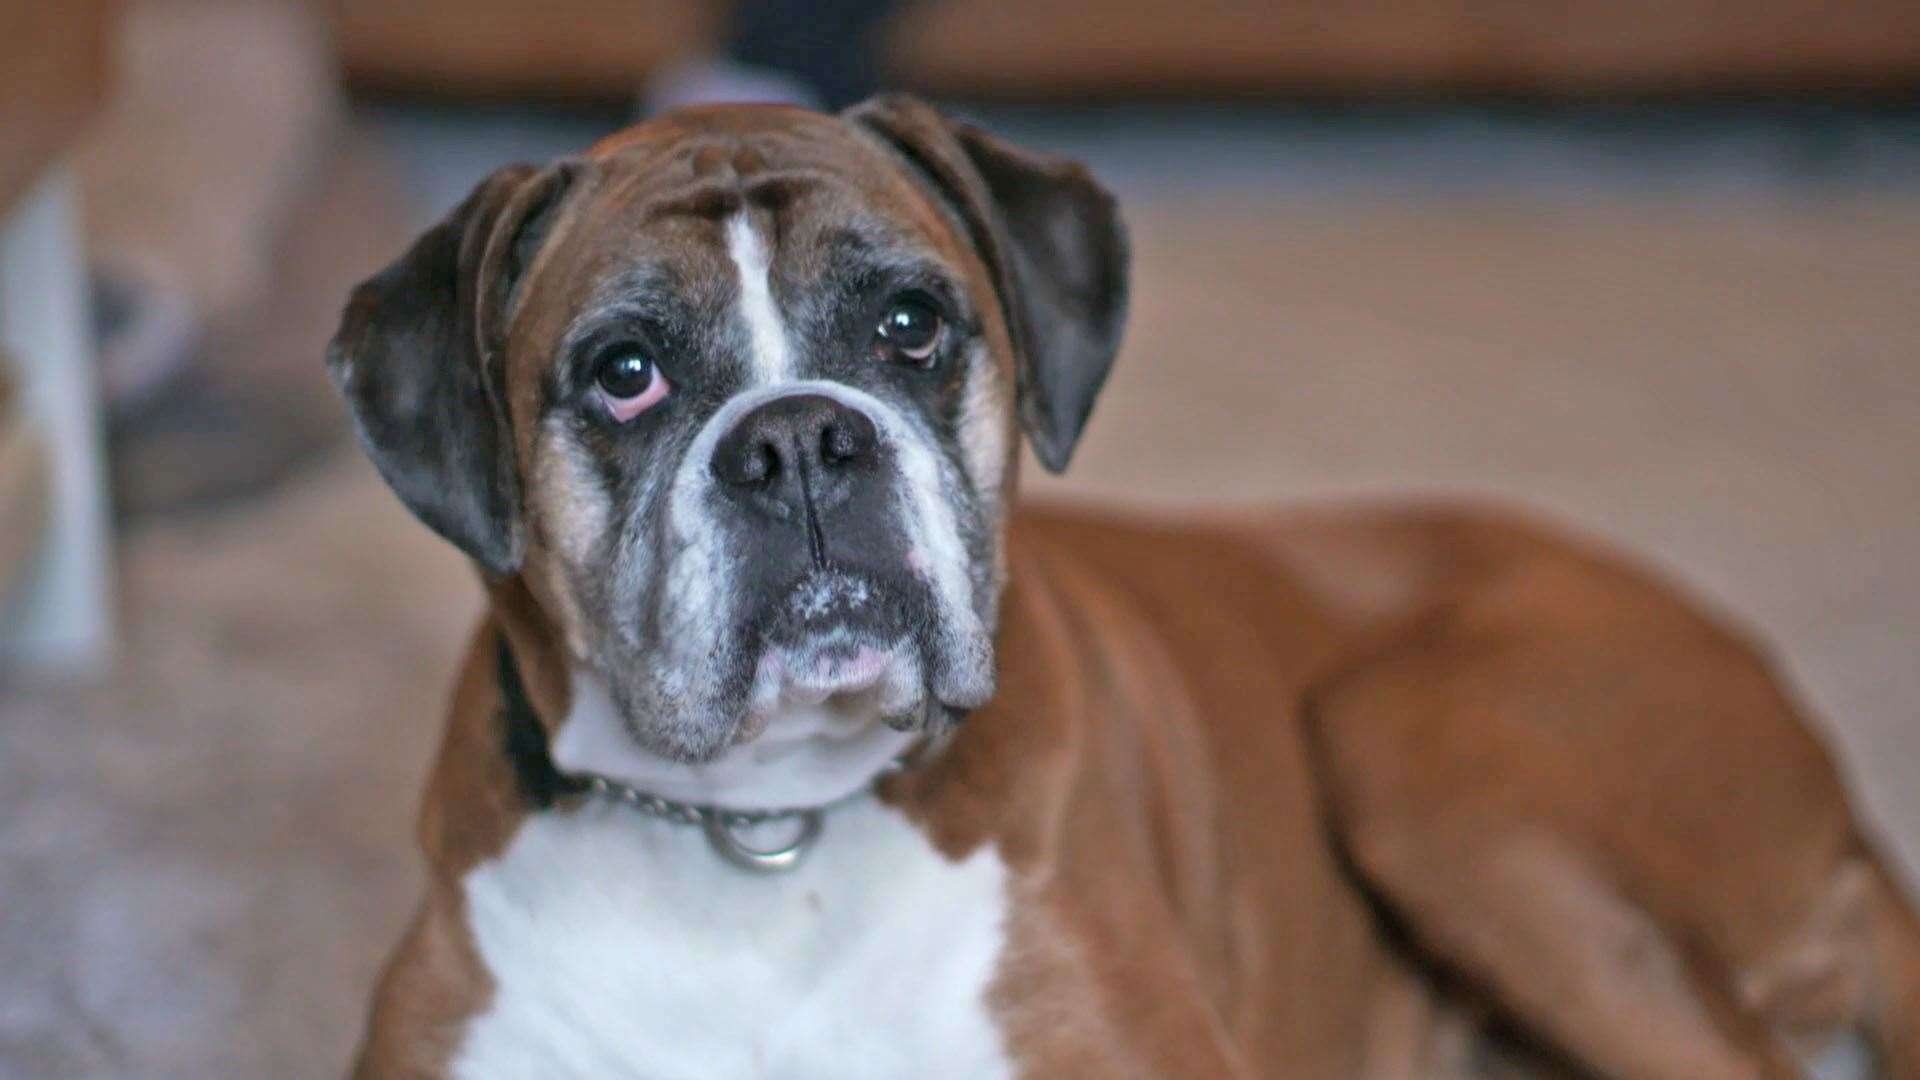 Maddy the boxer is featured in the new series of The Highland Vet. Picture: Daisybeck Studios / 5Select / MCG